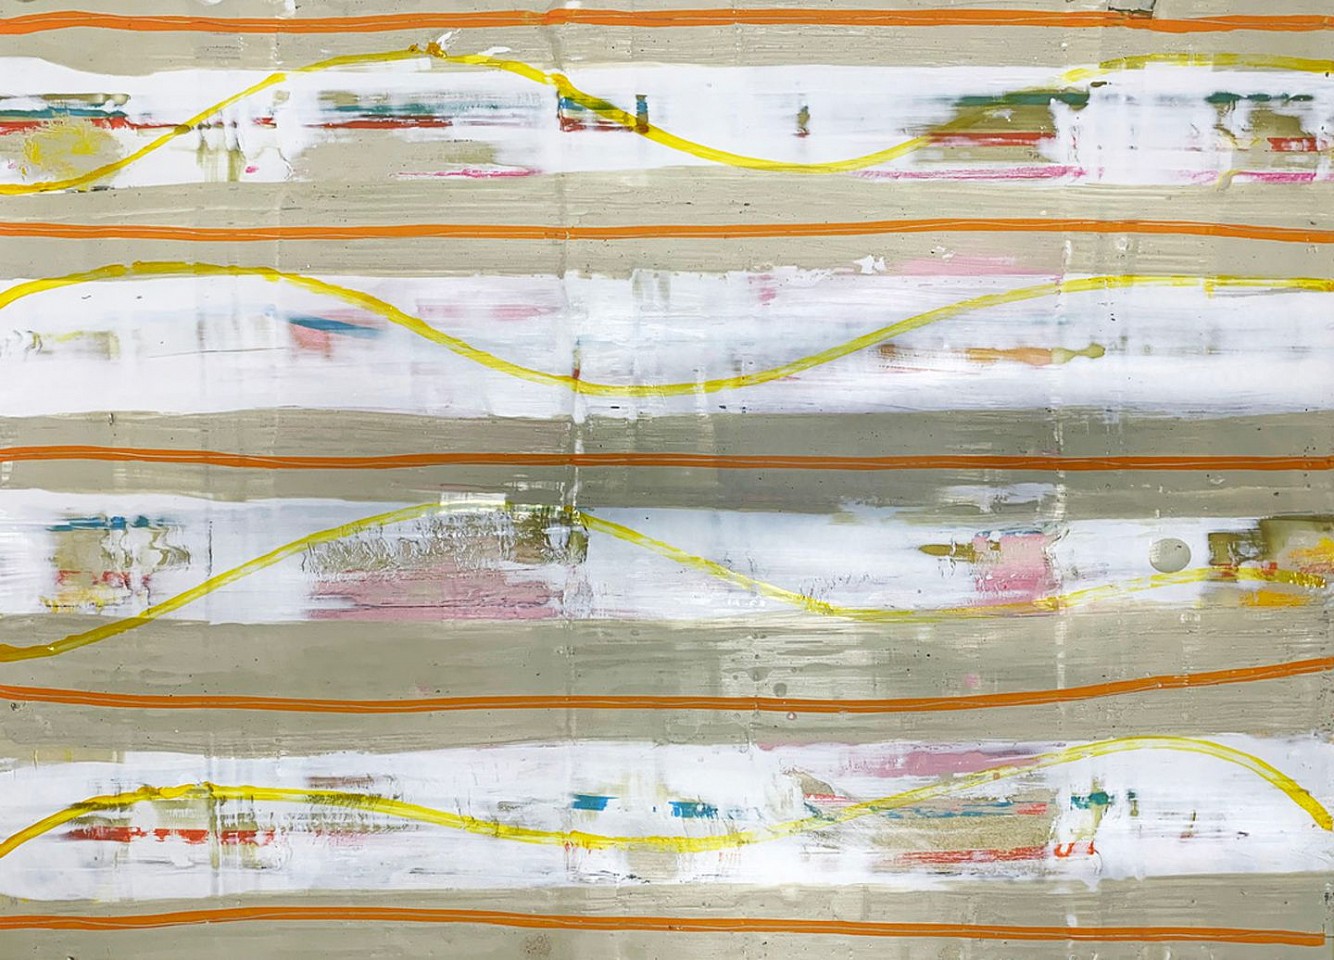 Don Maynard (LA)
Meridians, 2022
MAY413
encaustic and acrylic ink on paper, 22 x 30 1/2 inch paper / 14 x 20 inch image